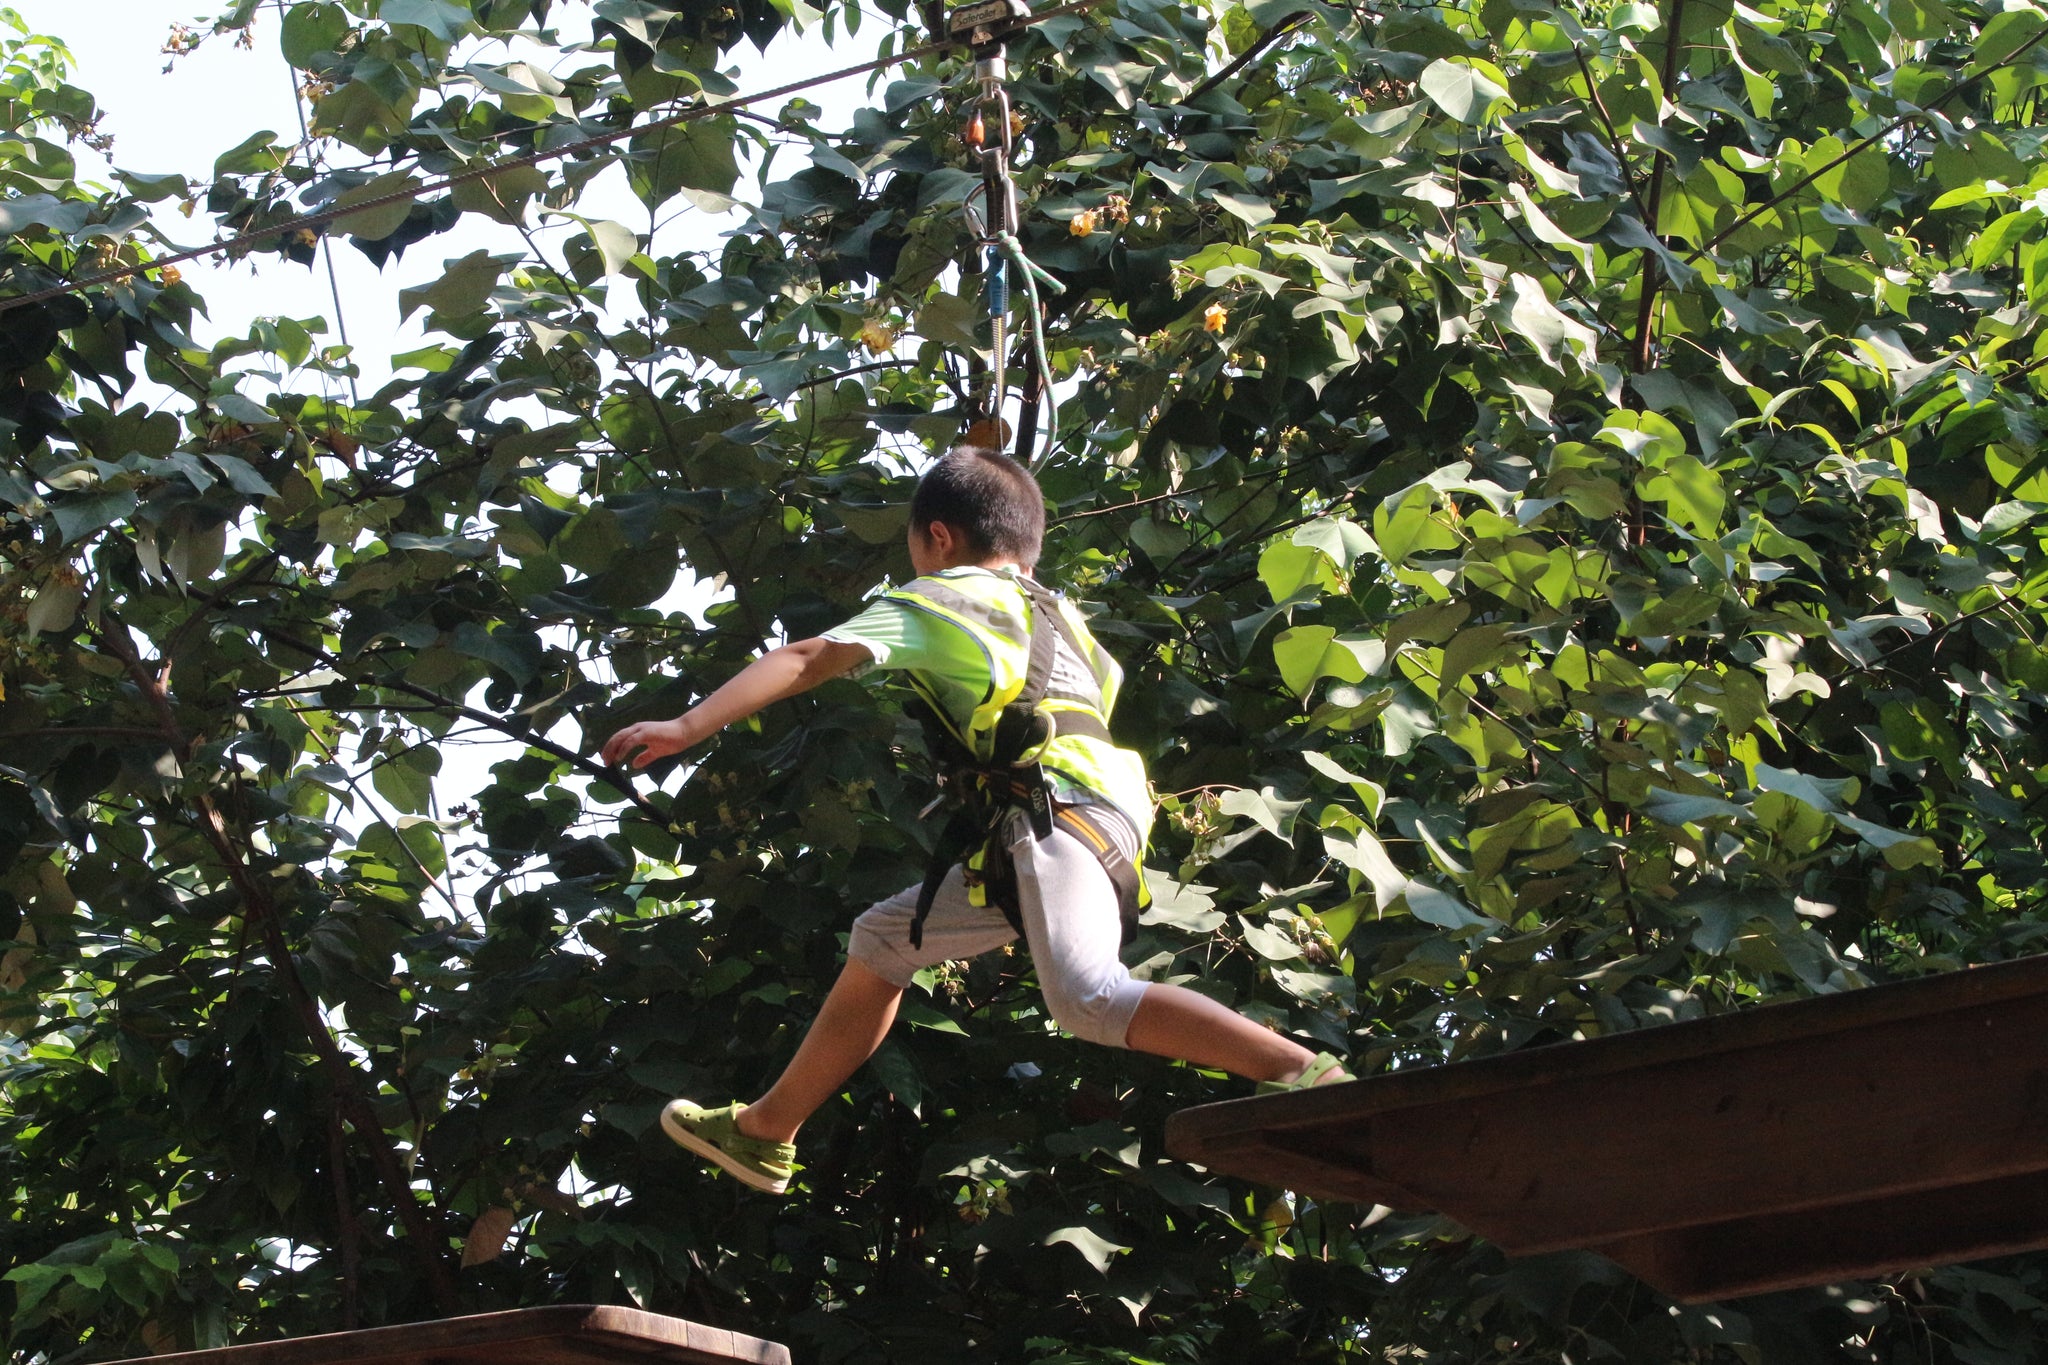 High Elements : Challenge Rope Course - High Achievers